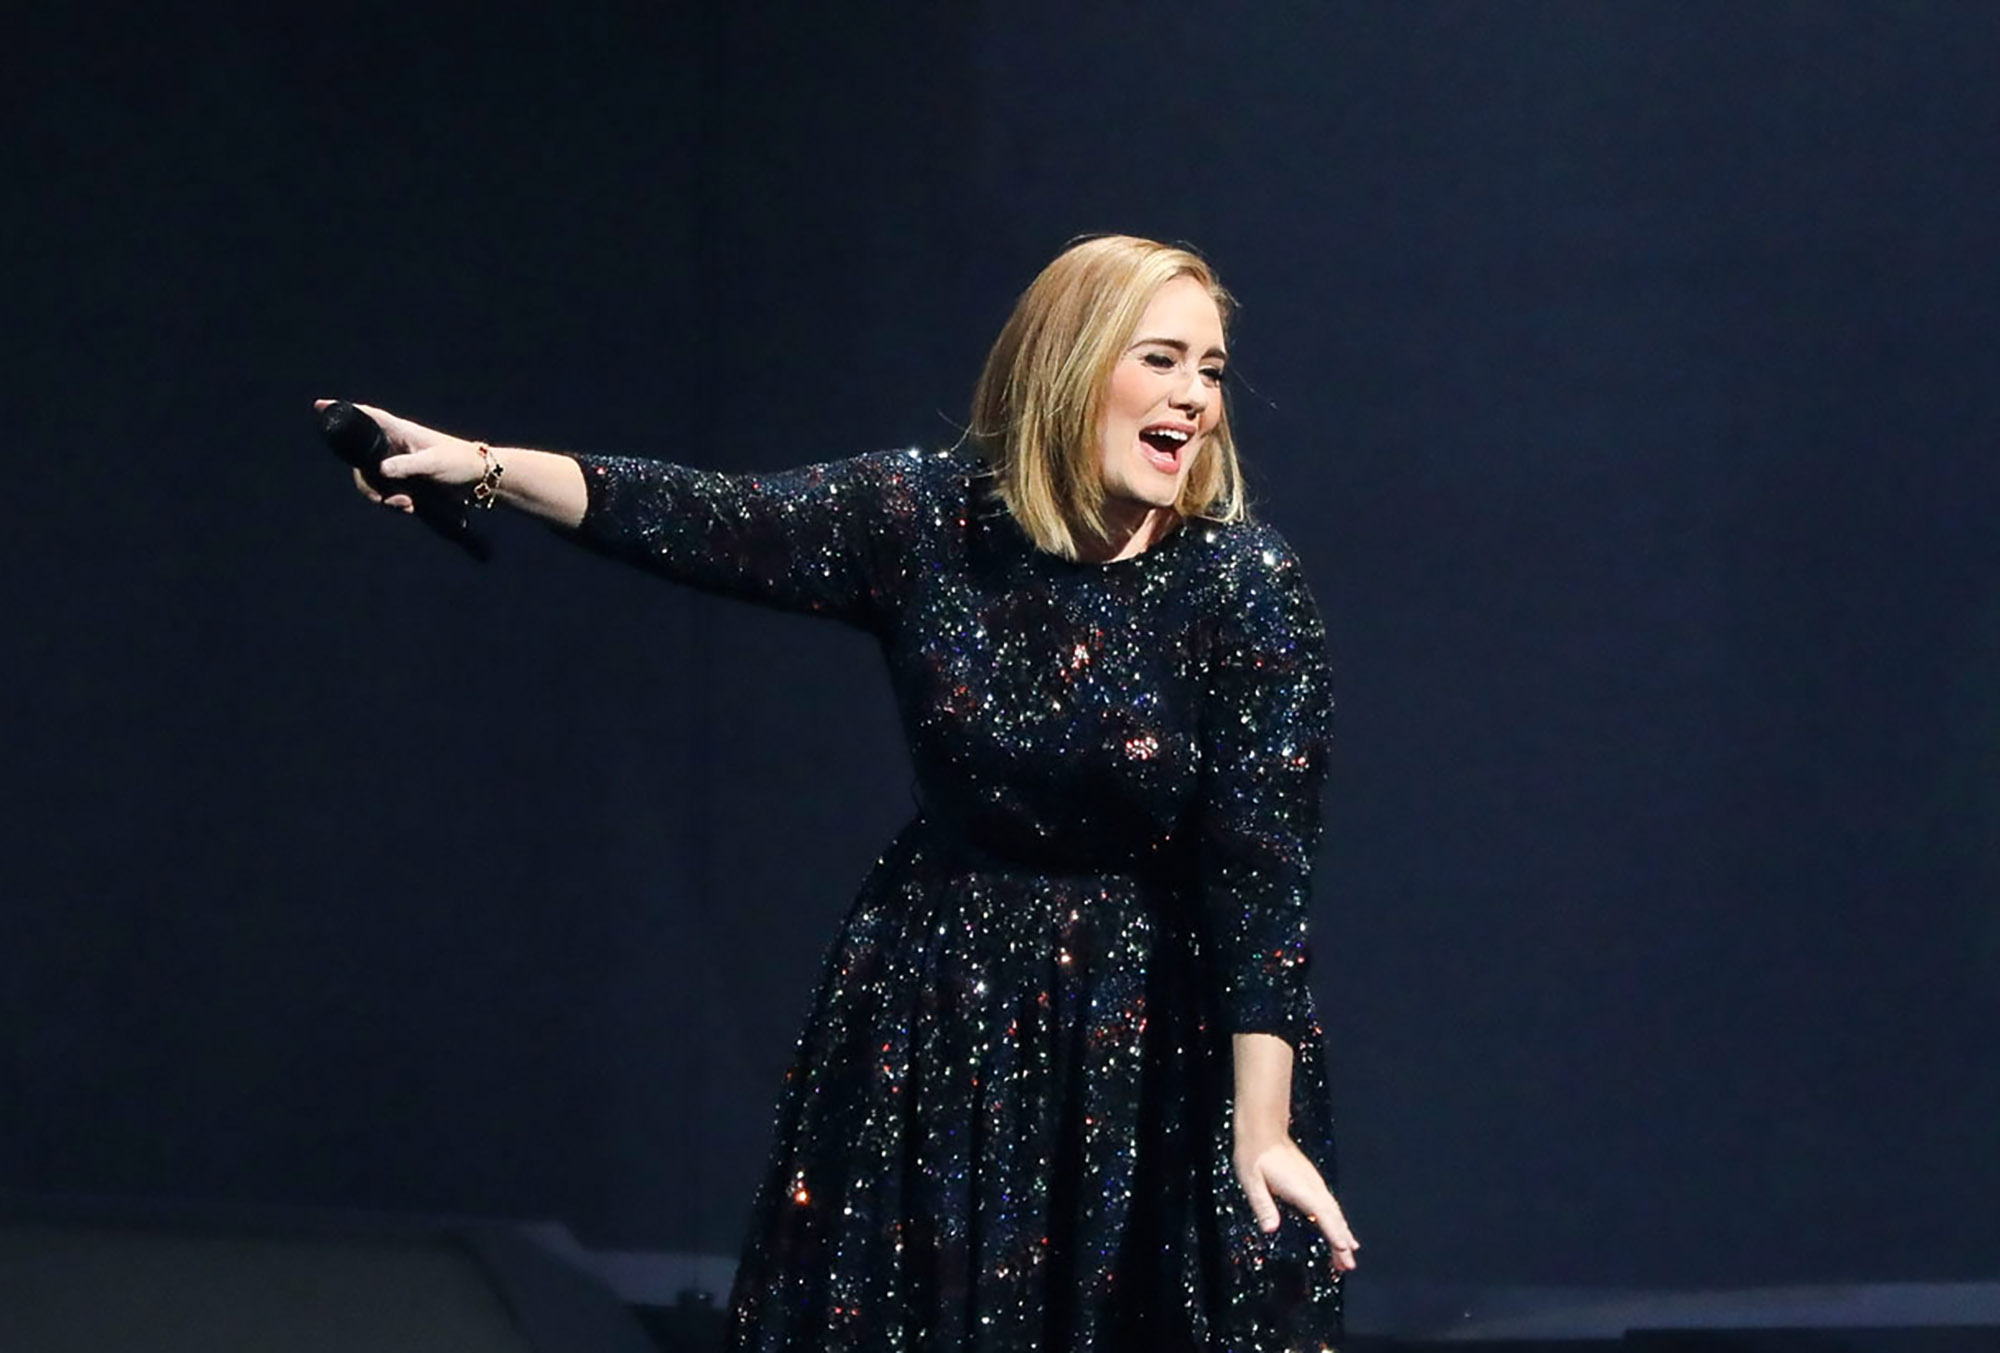 Adele performs at The Palace of Auburn Hills on September 6, 2016 in Auburn Hills, Michigan.  (Photo by Scott Legato/Getty Images for BT PR) (Scott Legato—Getty Images for BT PR)